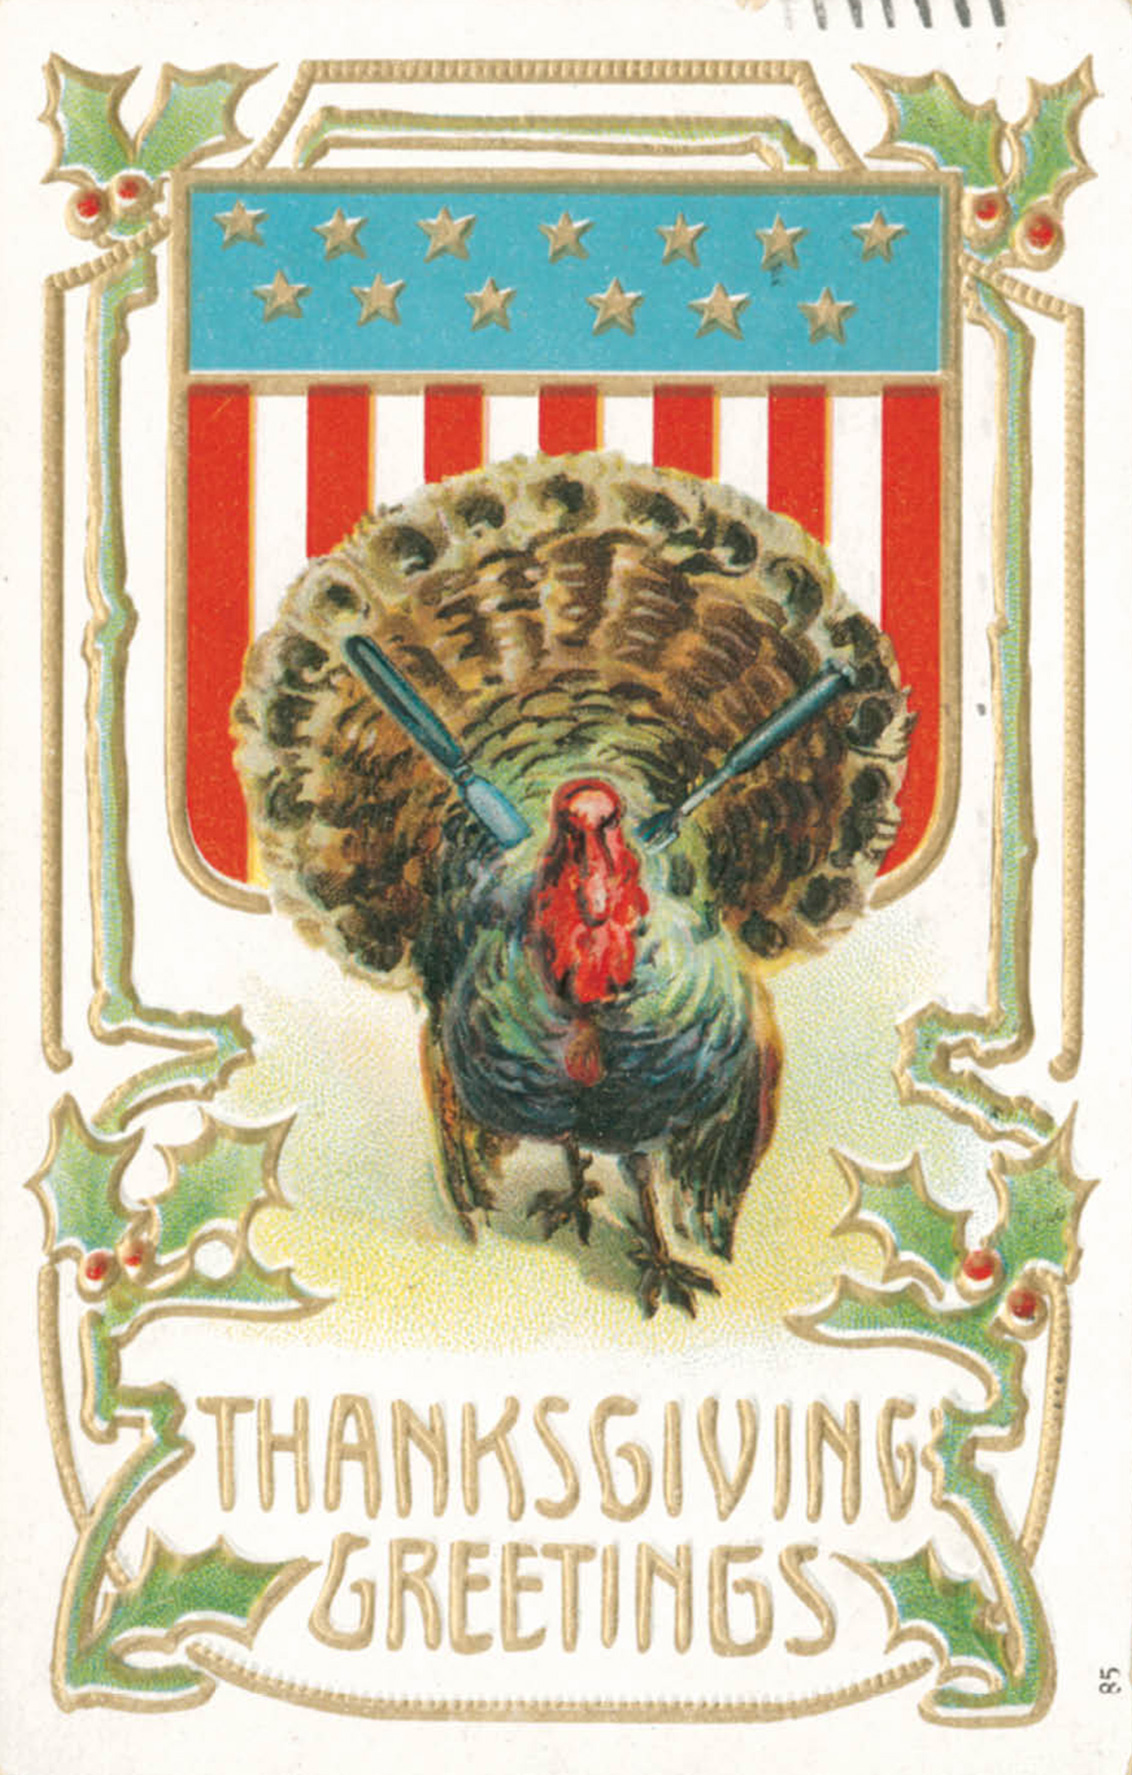 Above and following: American postcards celebrating the turkey, ca. 1880–1920. Courtesy Andrew F. Smith.